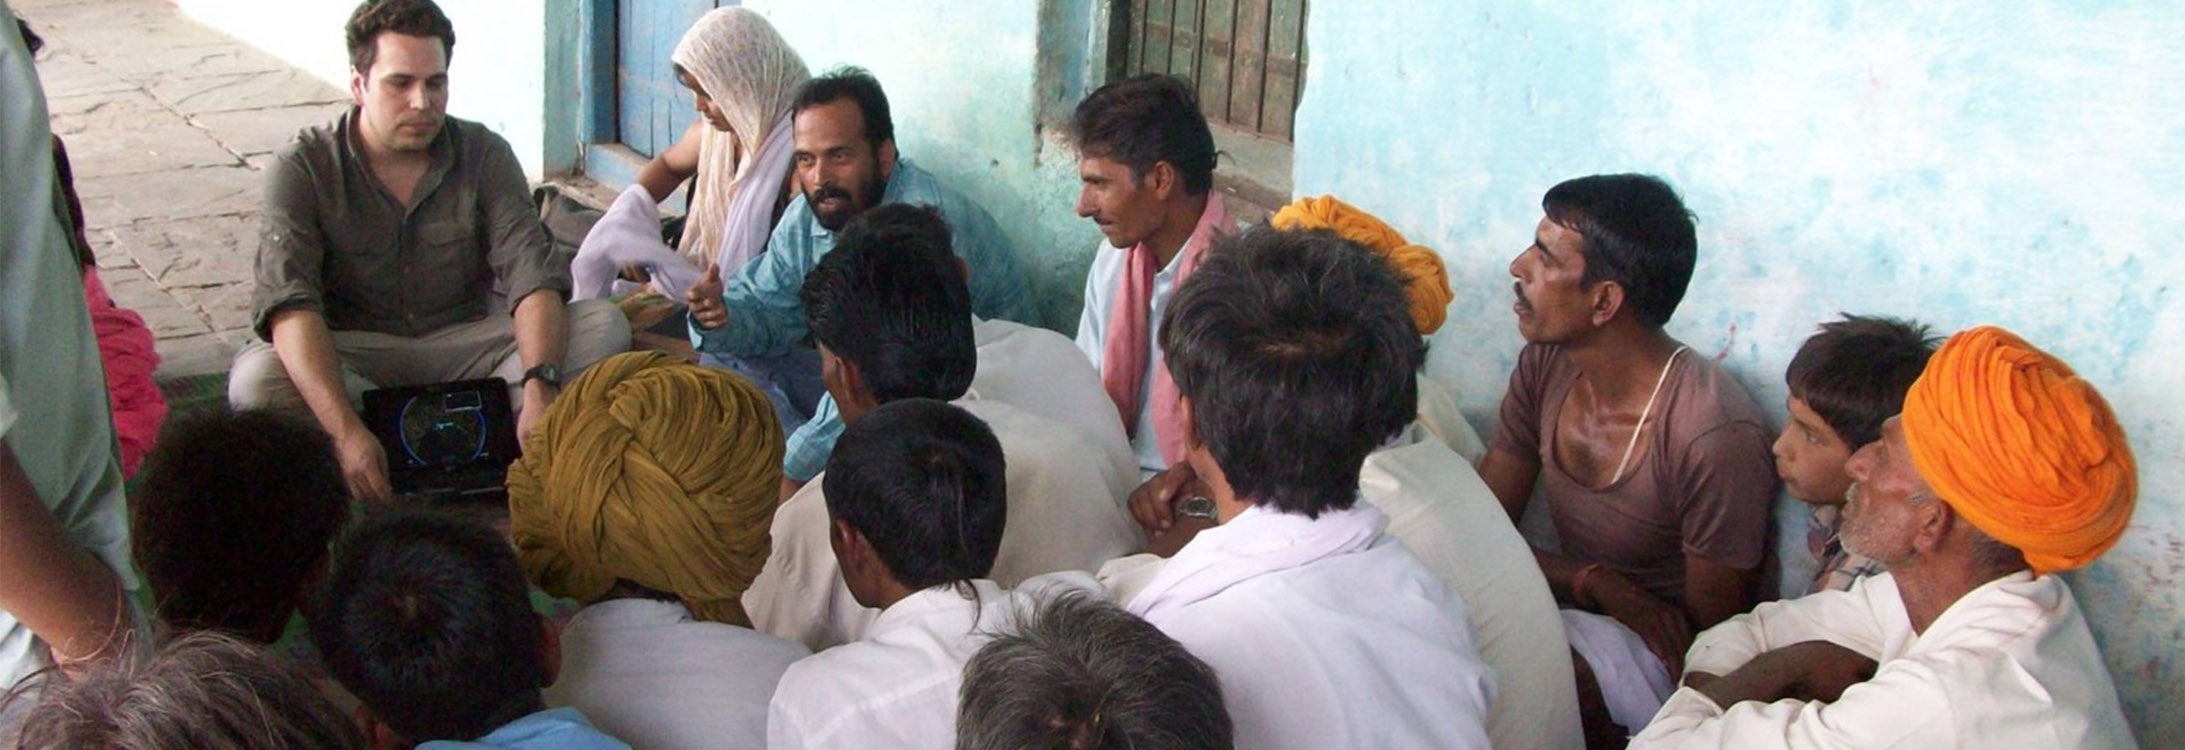 Dr. Stephen Moysey works with villagers in Salri, Madhya Pradesh, India, to understand how agricultural practices impact water sustainability in their watershed. (Contributed photos)